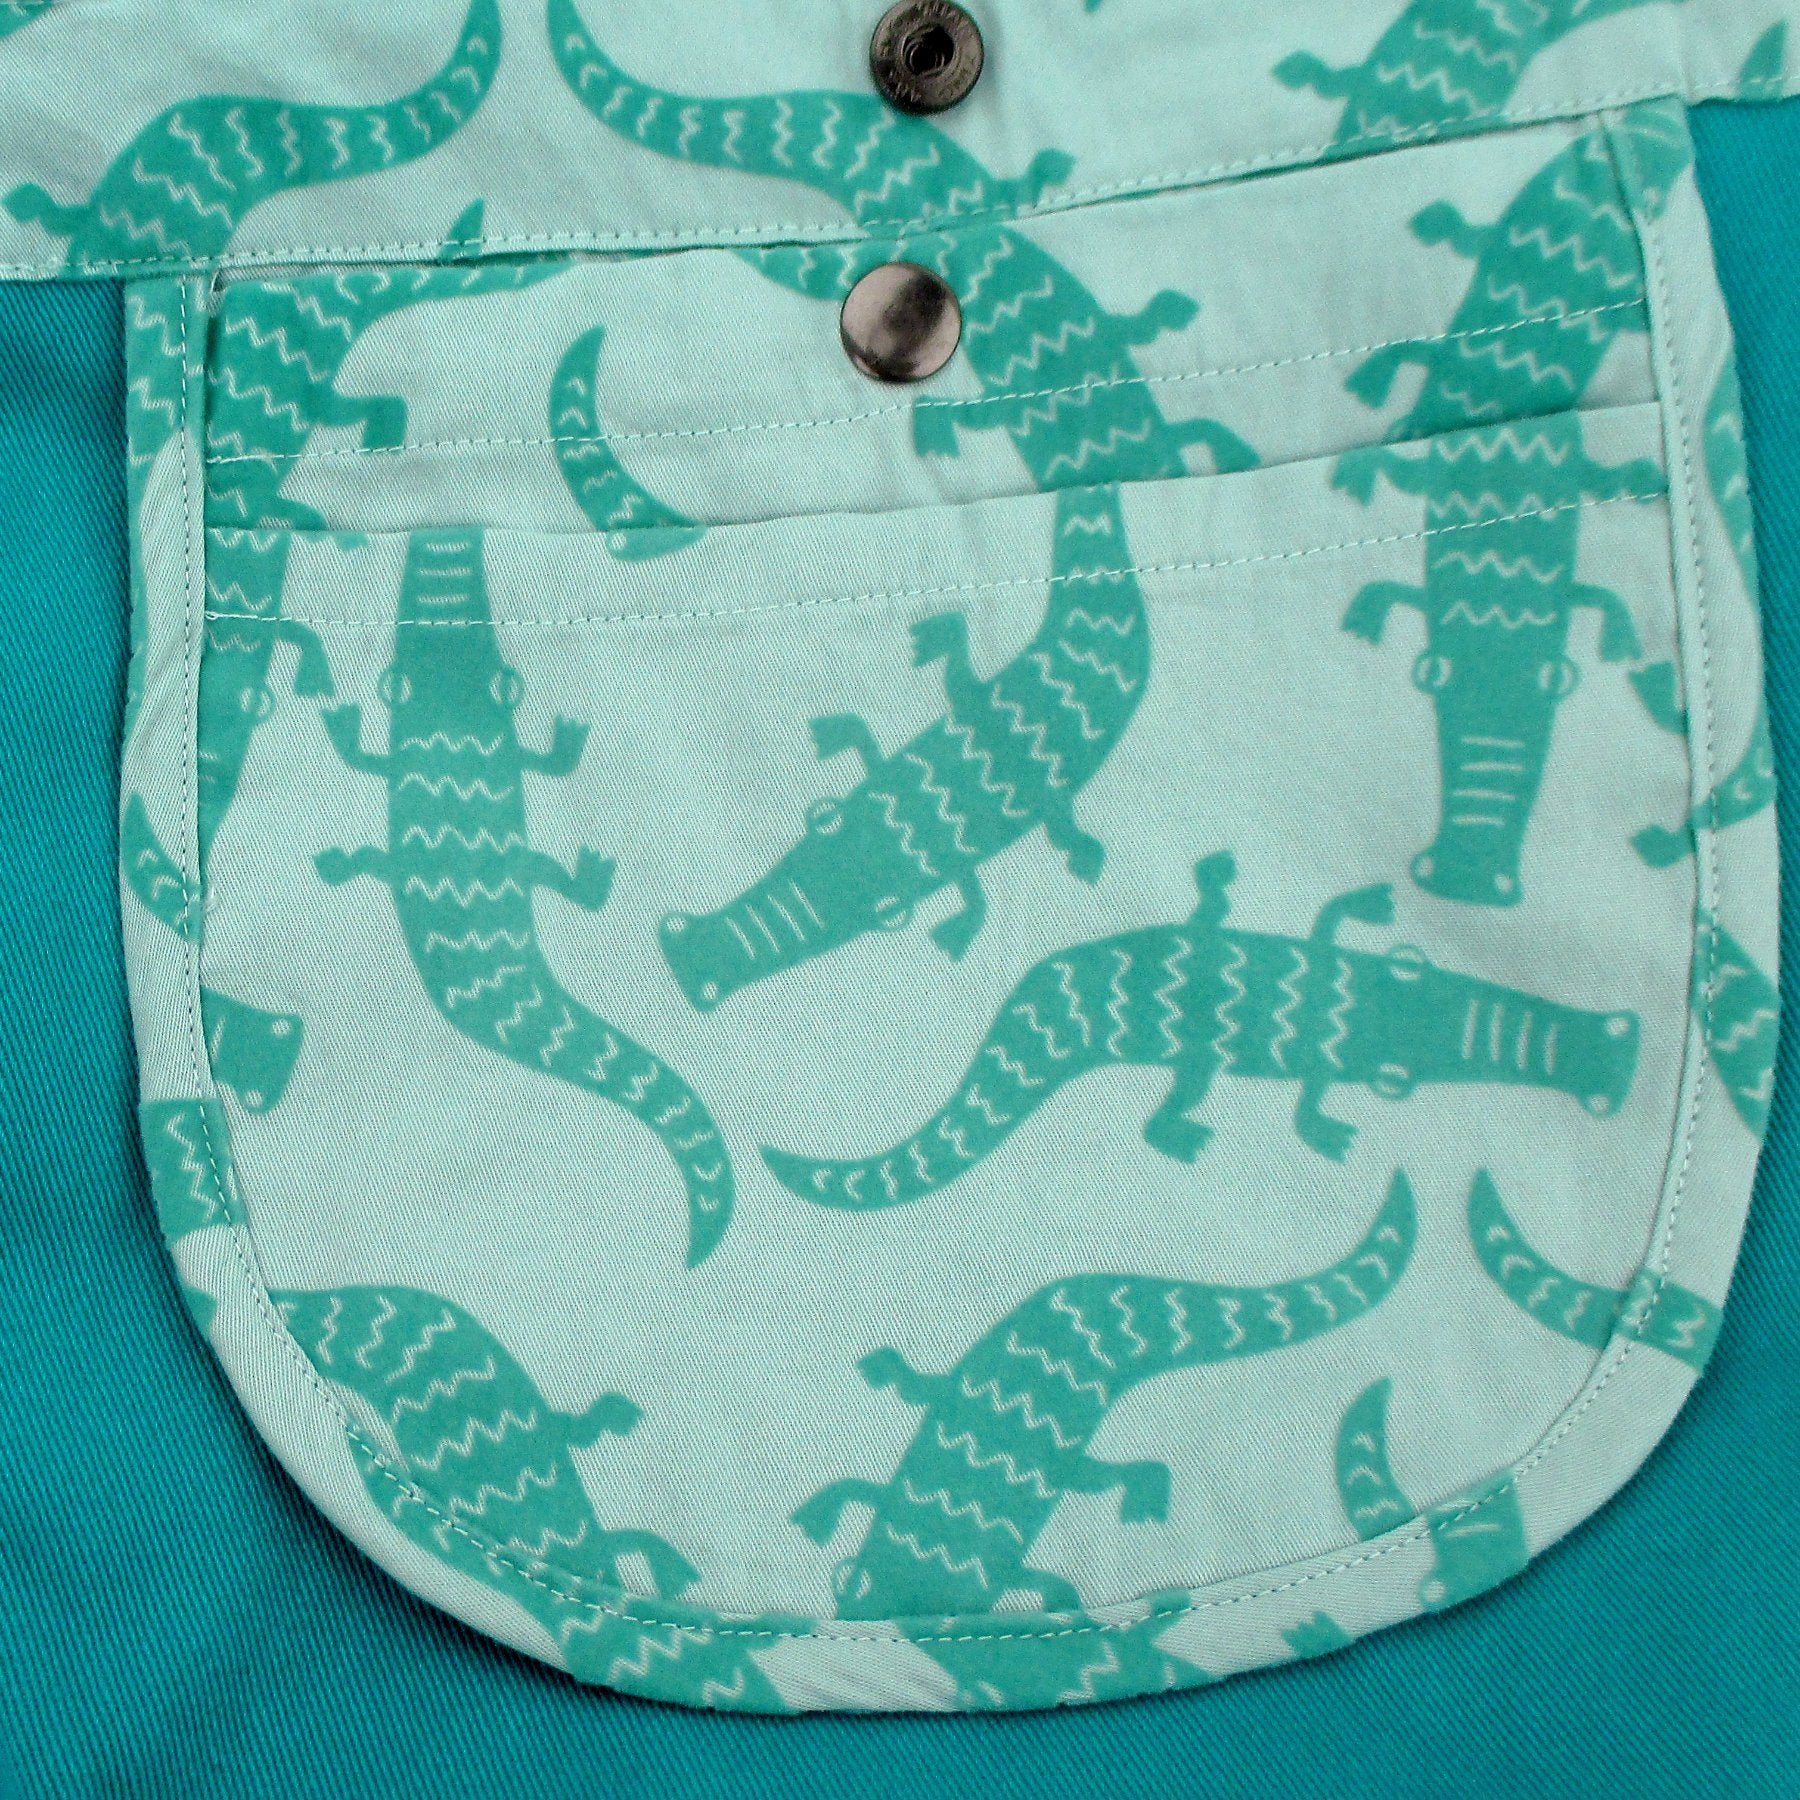 Throw this cute crocodile inspired cross body cotton bag on and express your love for them too! This is a limited edition print so make it snappy and add it to cart while stock lasts!